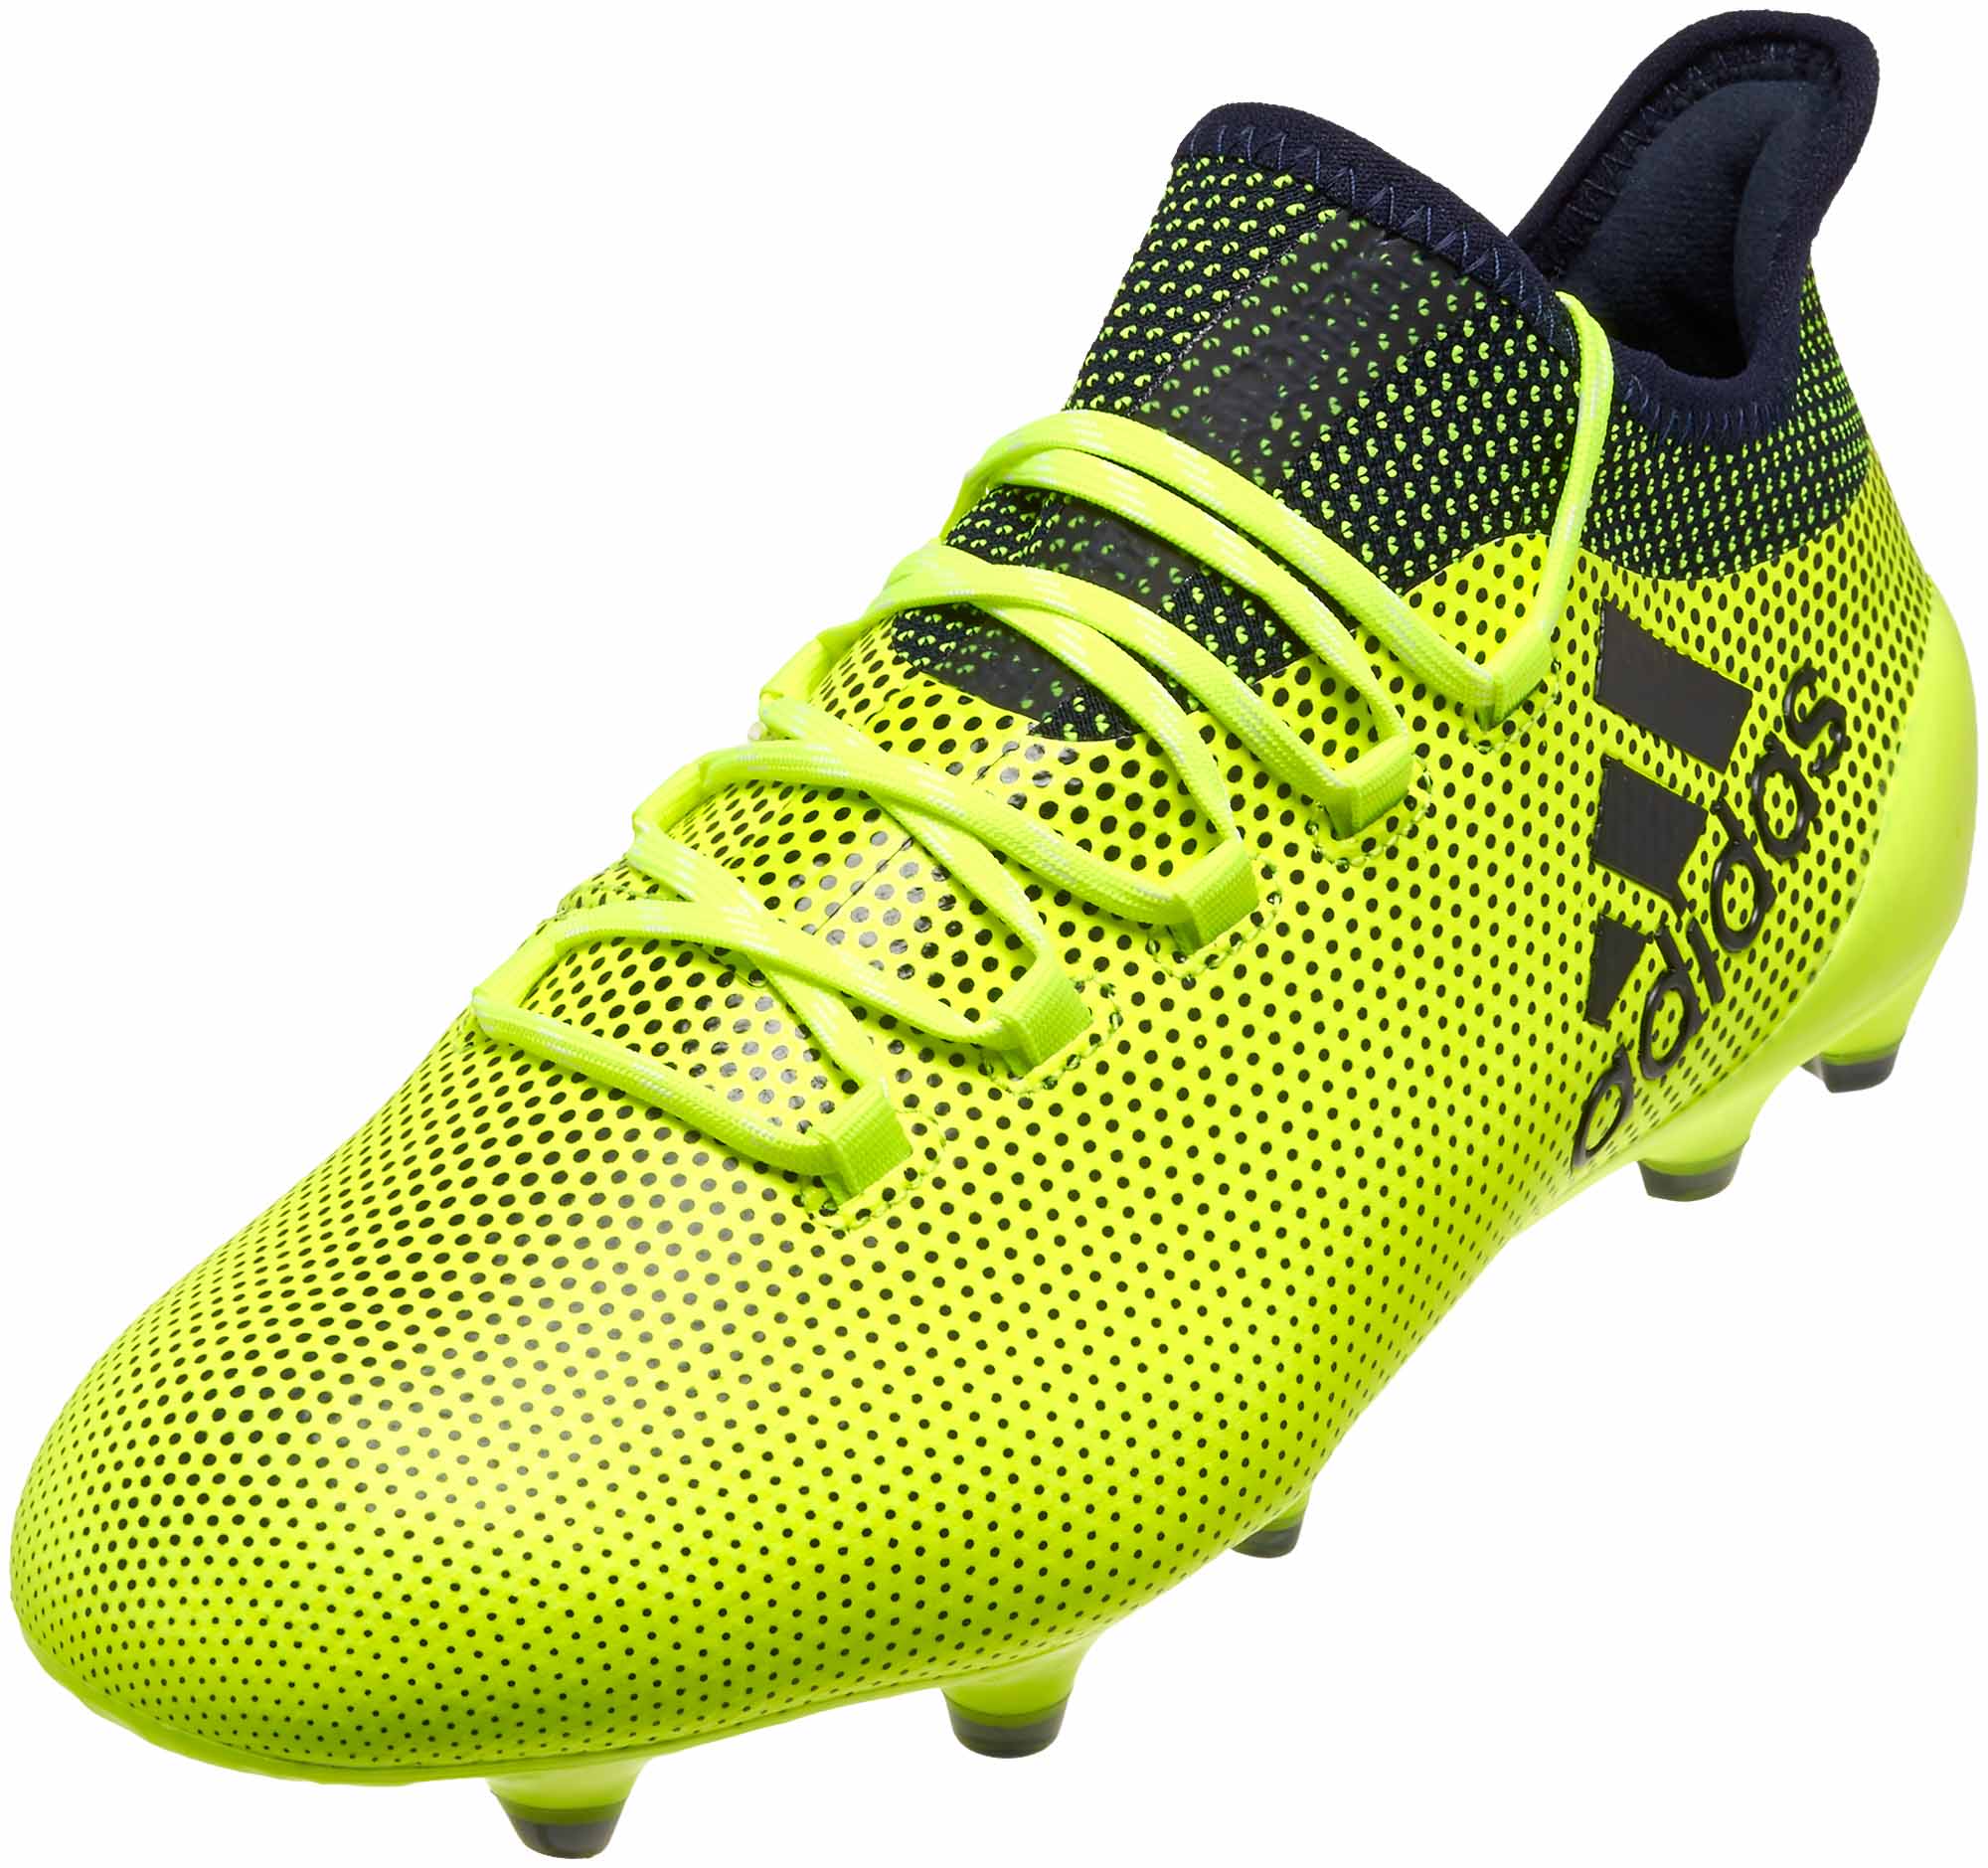 adidas yellow soccer shoes